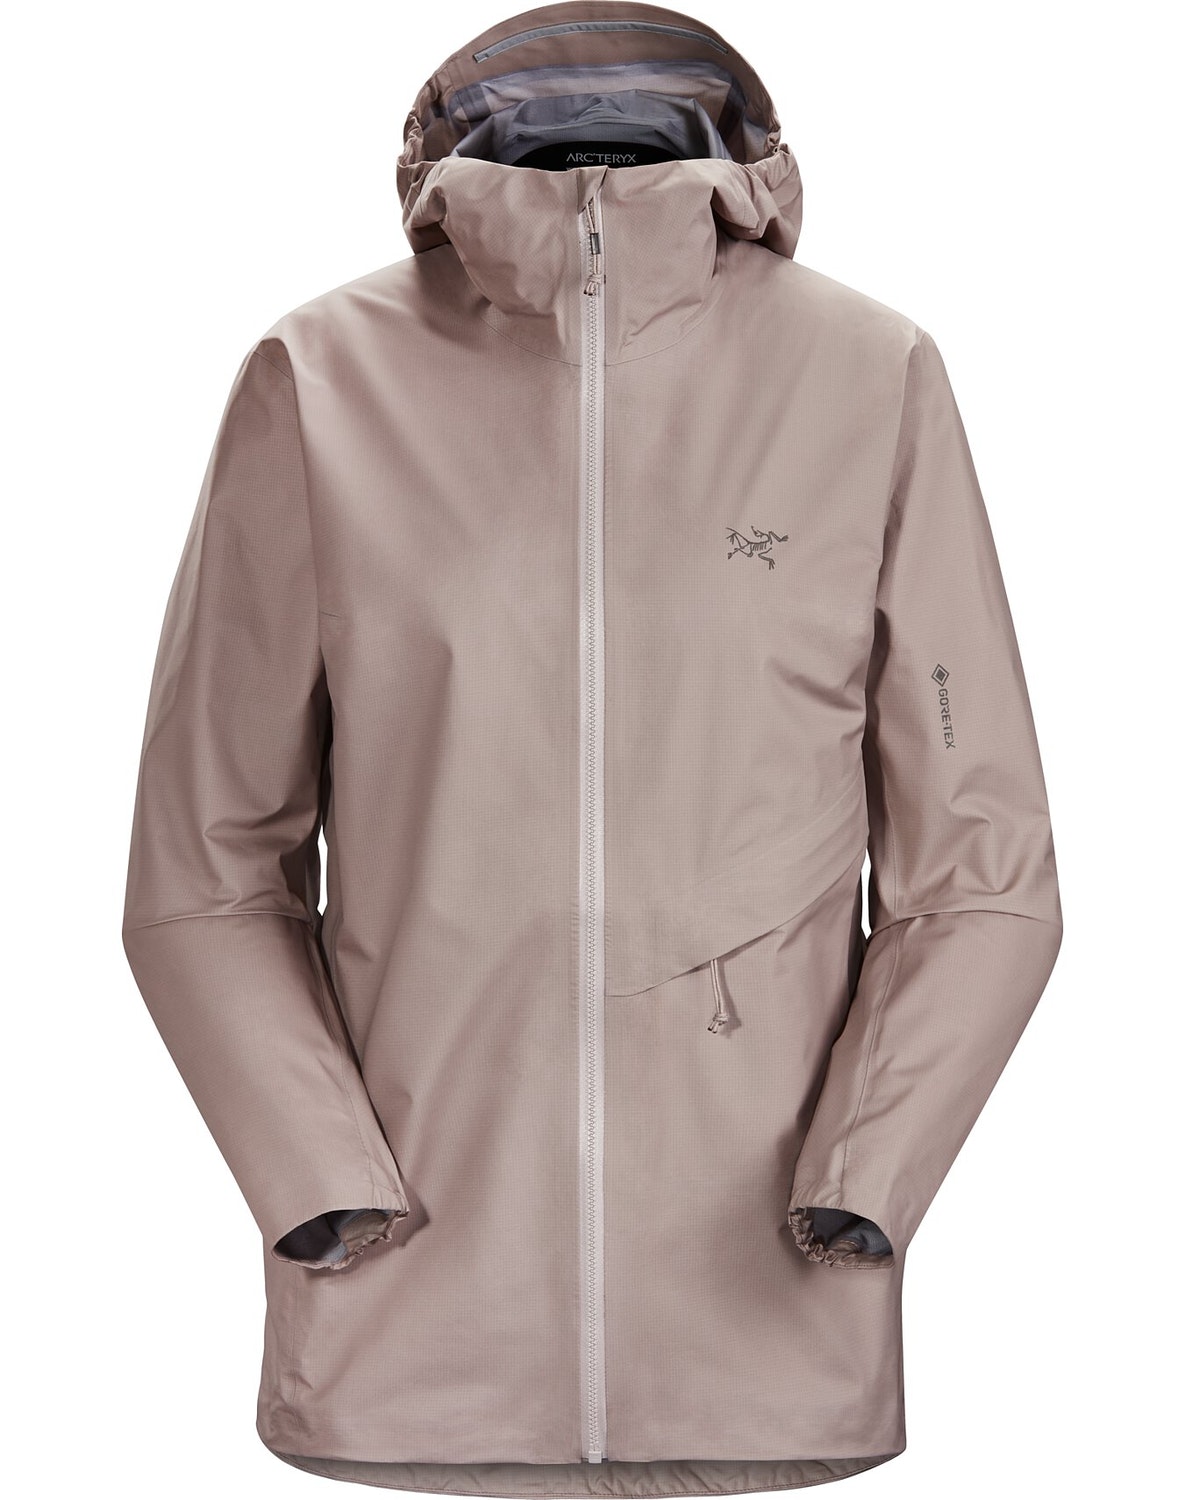 Giacche Running Arc'teryx Norvan LT Donna Platino Scuro - IT-7345467